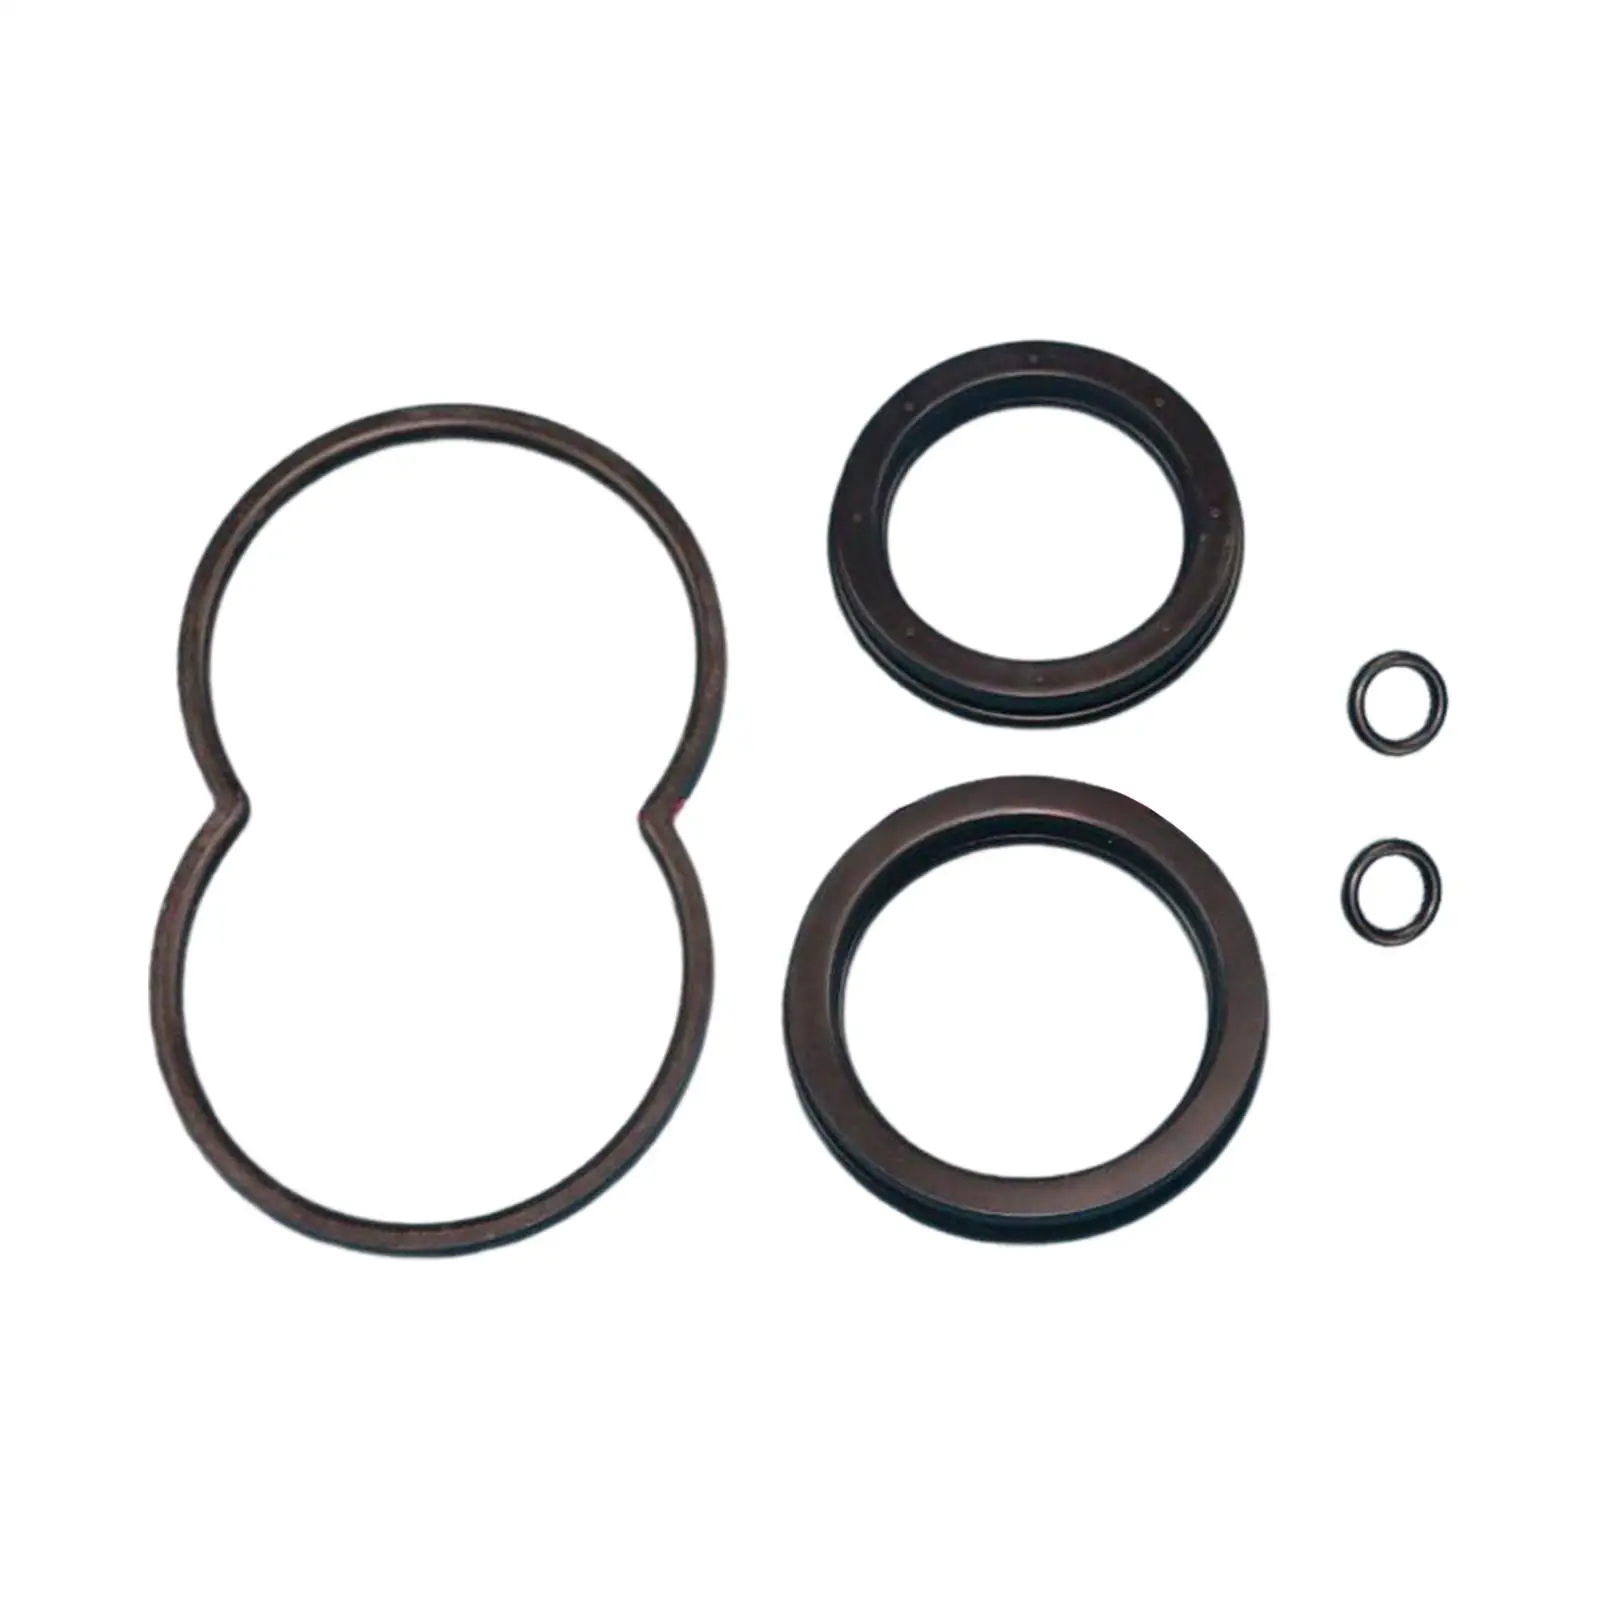 2771004 Seal Leak Repair Kits Fittings Stable 5 Pieces Seal Kits for